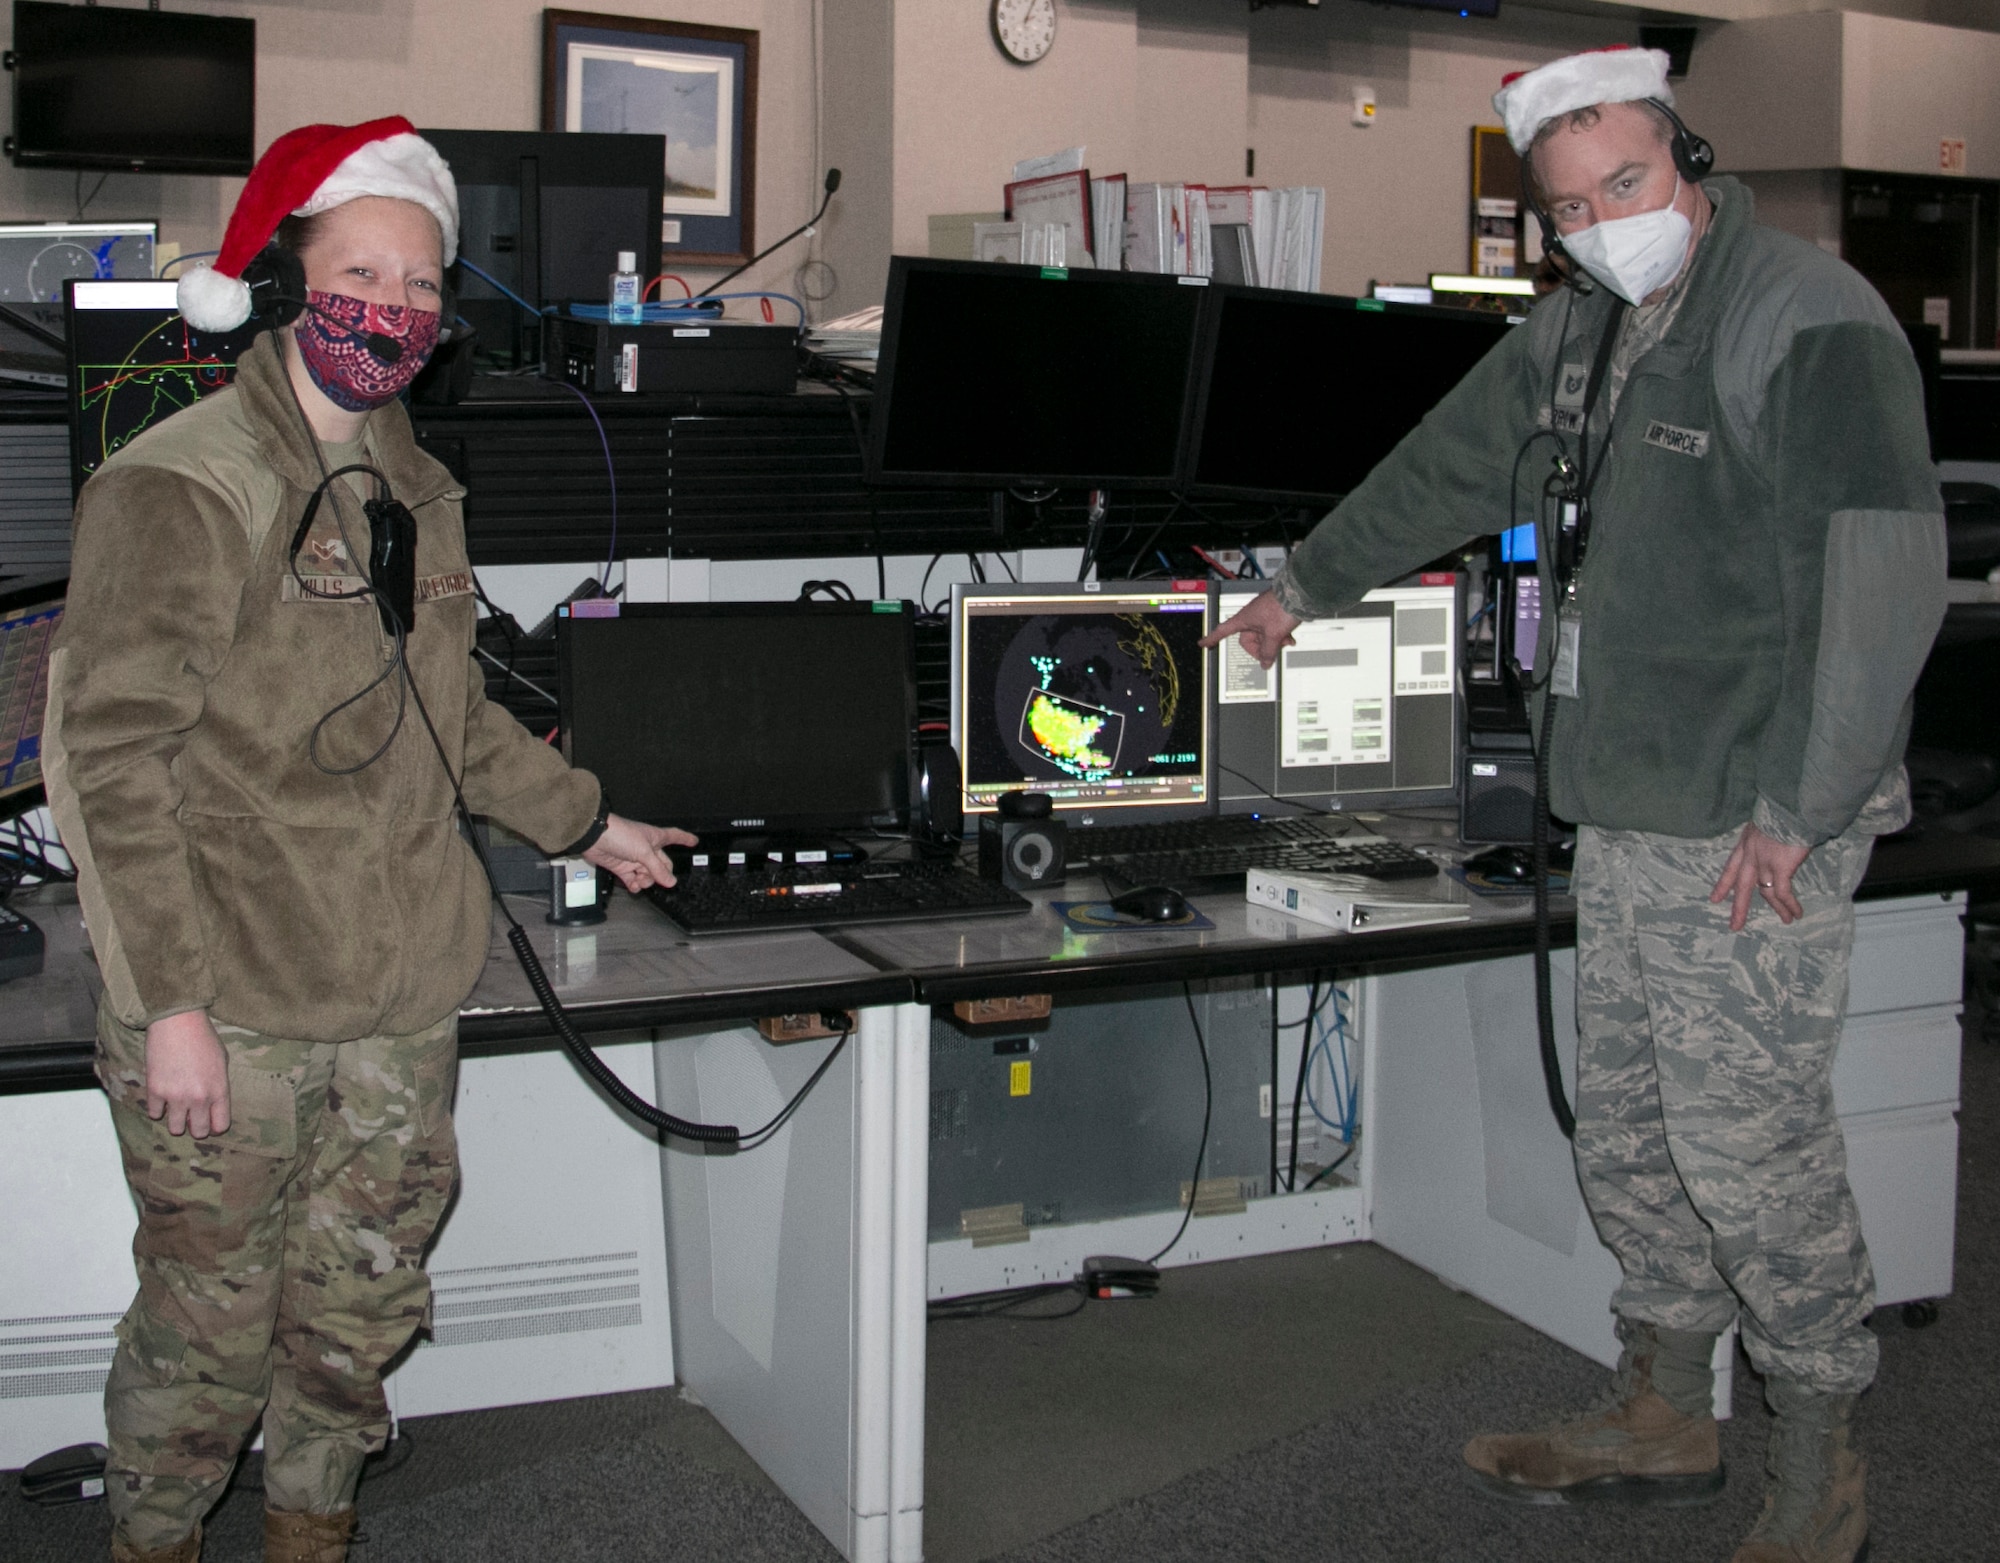 U.S. Air Force Airmen, Airman 1st Class Megan Mills, left, and Tech. Sgt. Kriston Brown, right, participate in a Santa tracking exercise at the Eastern Air Defense Sector on Dec. 16, 2020. Mills and Brown were prepping for Christmas Eve, when EADS will support the North American Aerospace Defense Command's (NORAD) Santa tracking operation. ( U.S. Air National Guard Photo by Tim Jones)